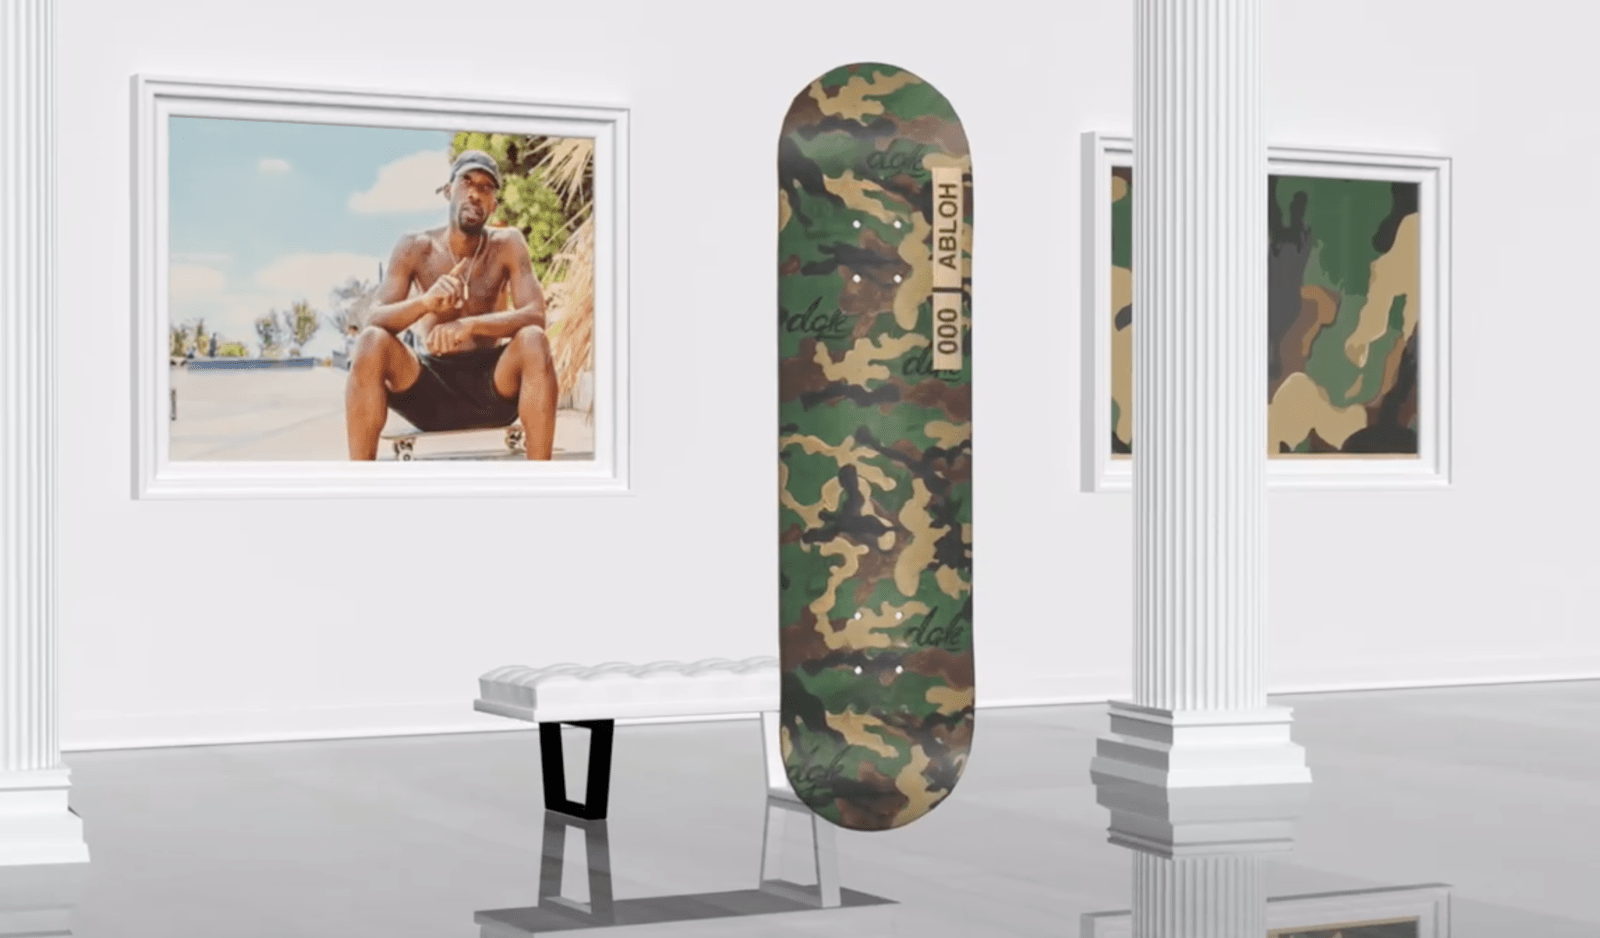 Virgil Abloh, DGK, and Chill Foundation to Launch Skateboarding